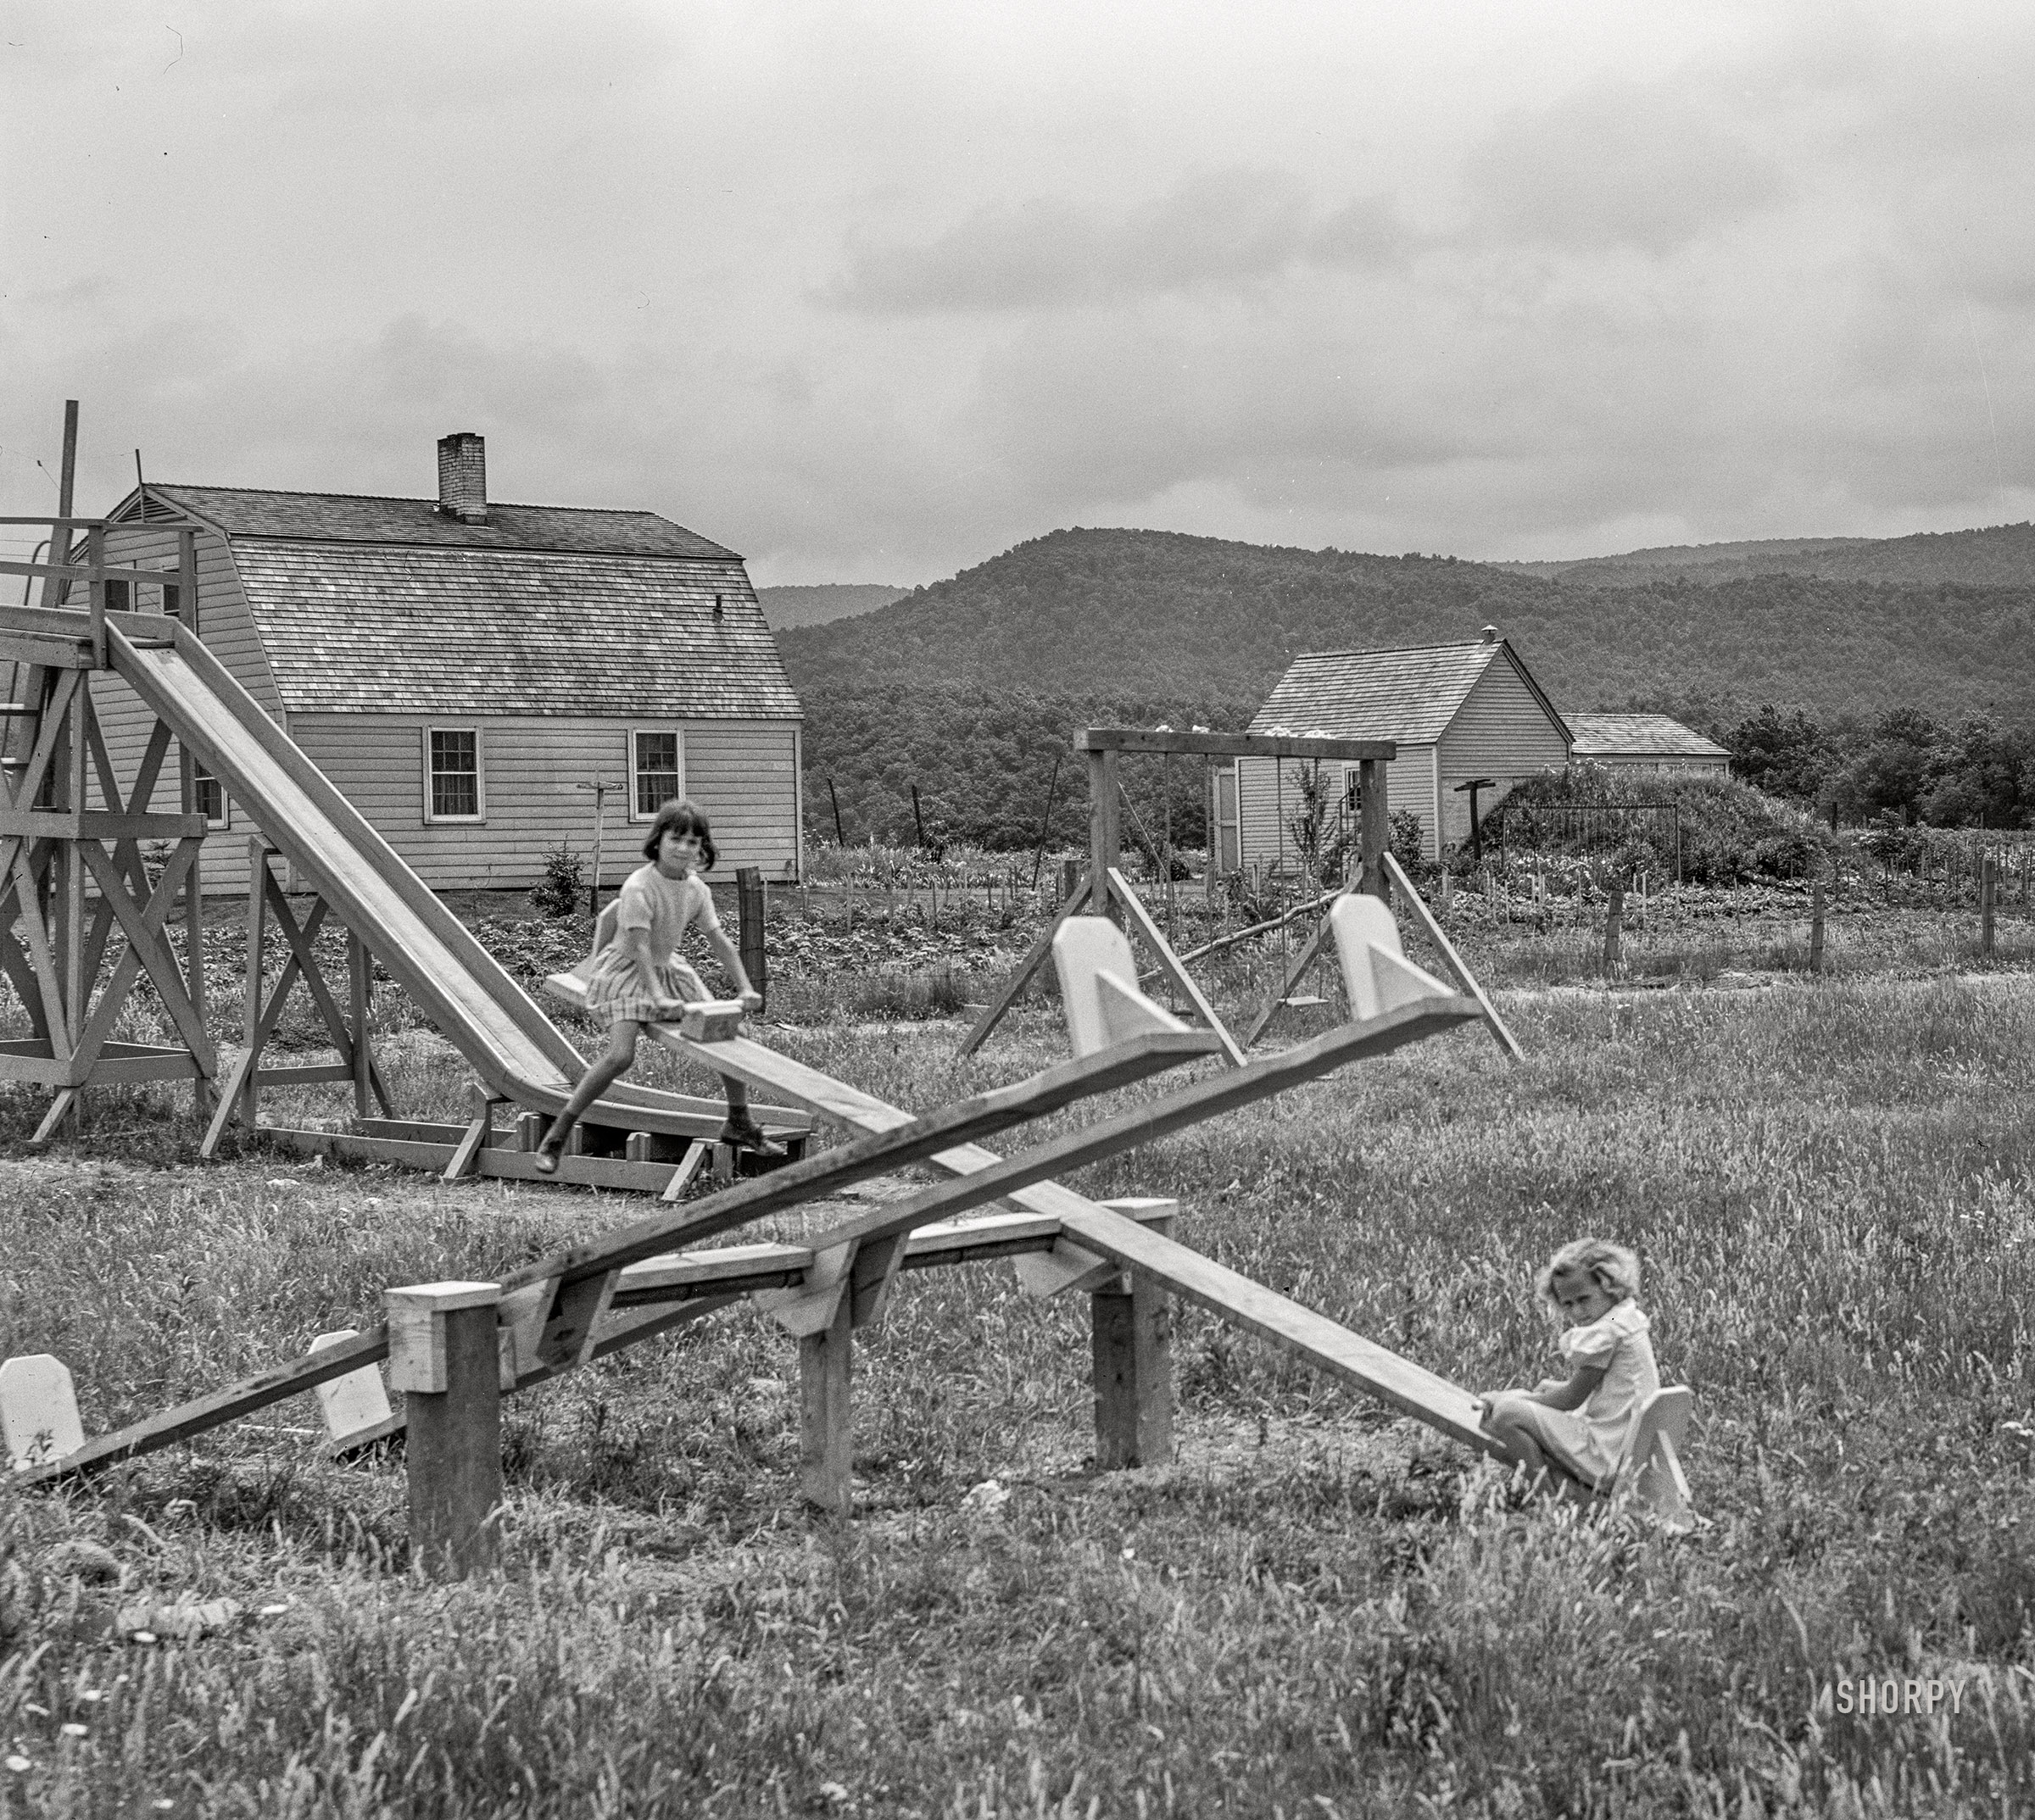 June 1939. "Children playing -- Tygart Valley Homesteads, West Virginia." Medium format acetate negative by John Vachon for the Resettlement Administration. View full size.
